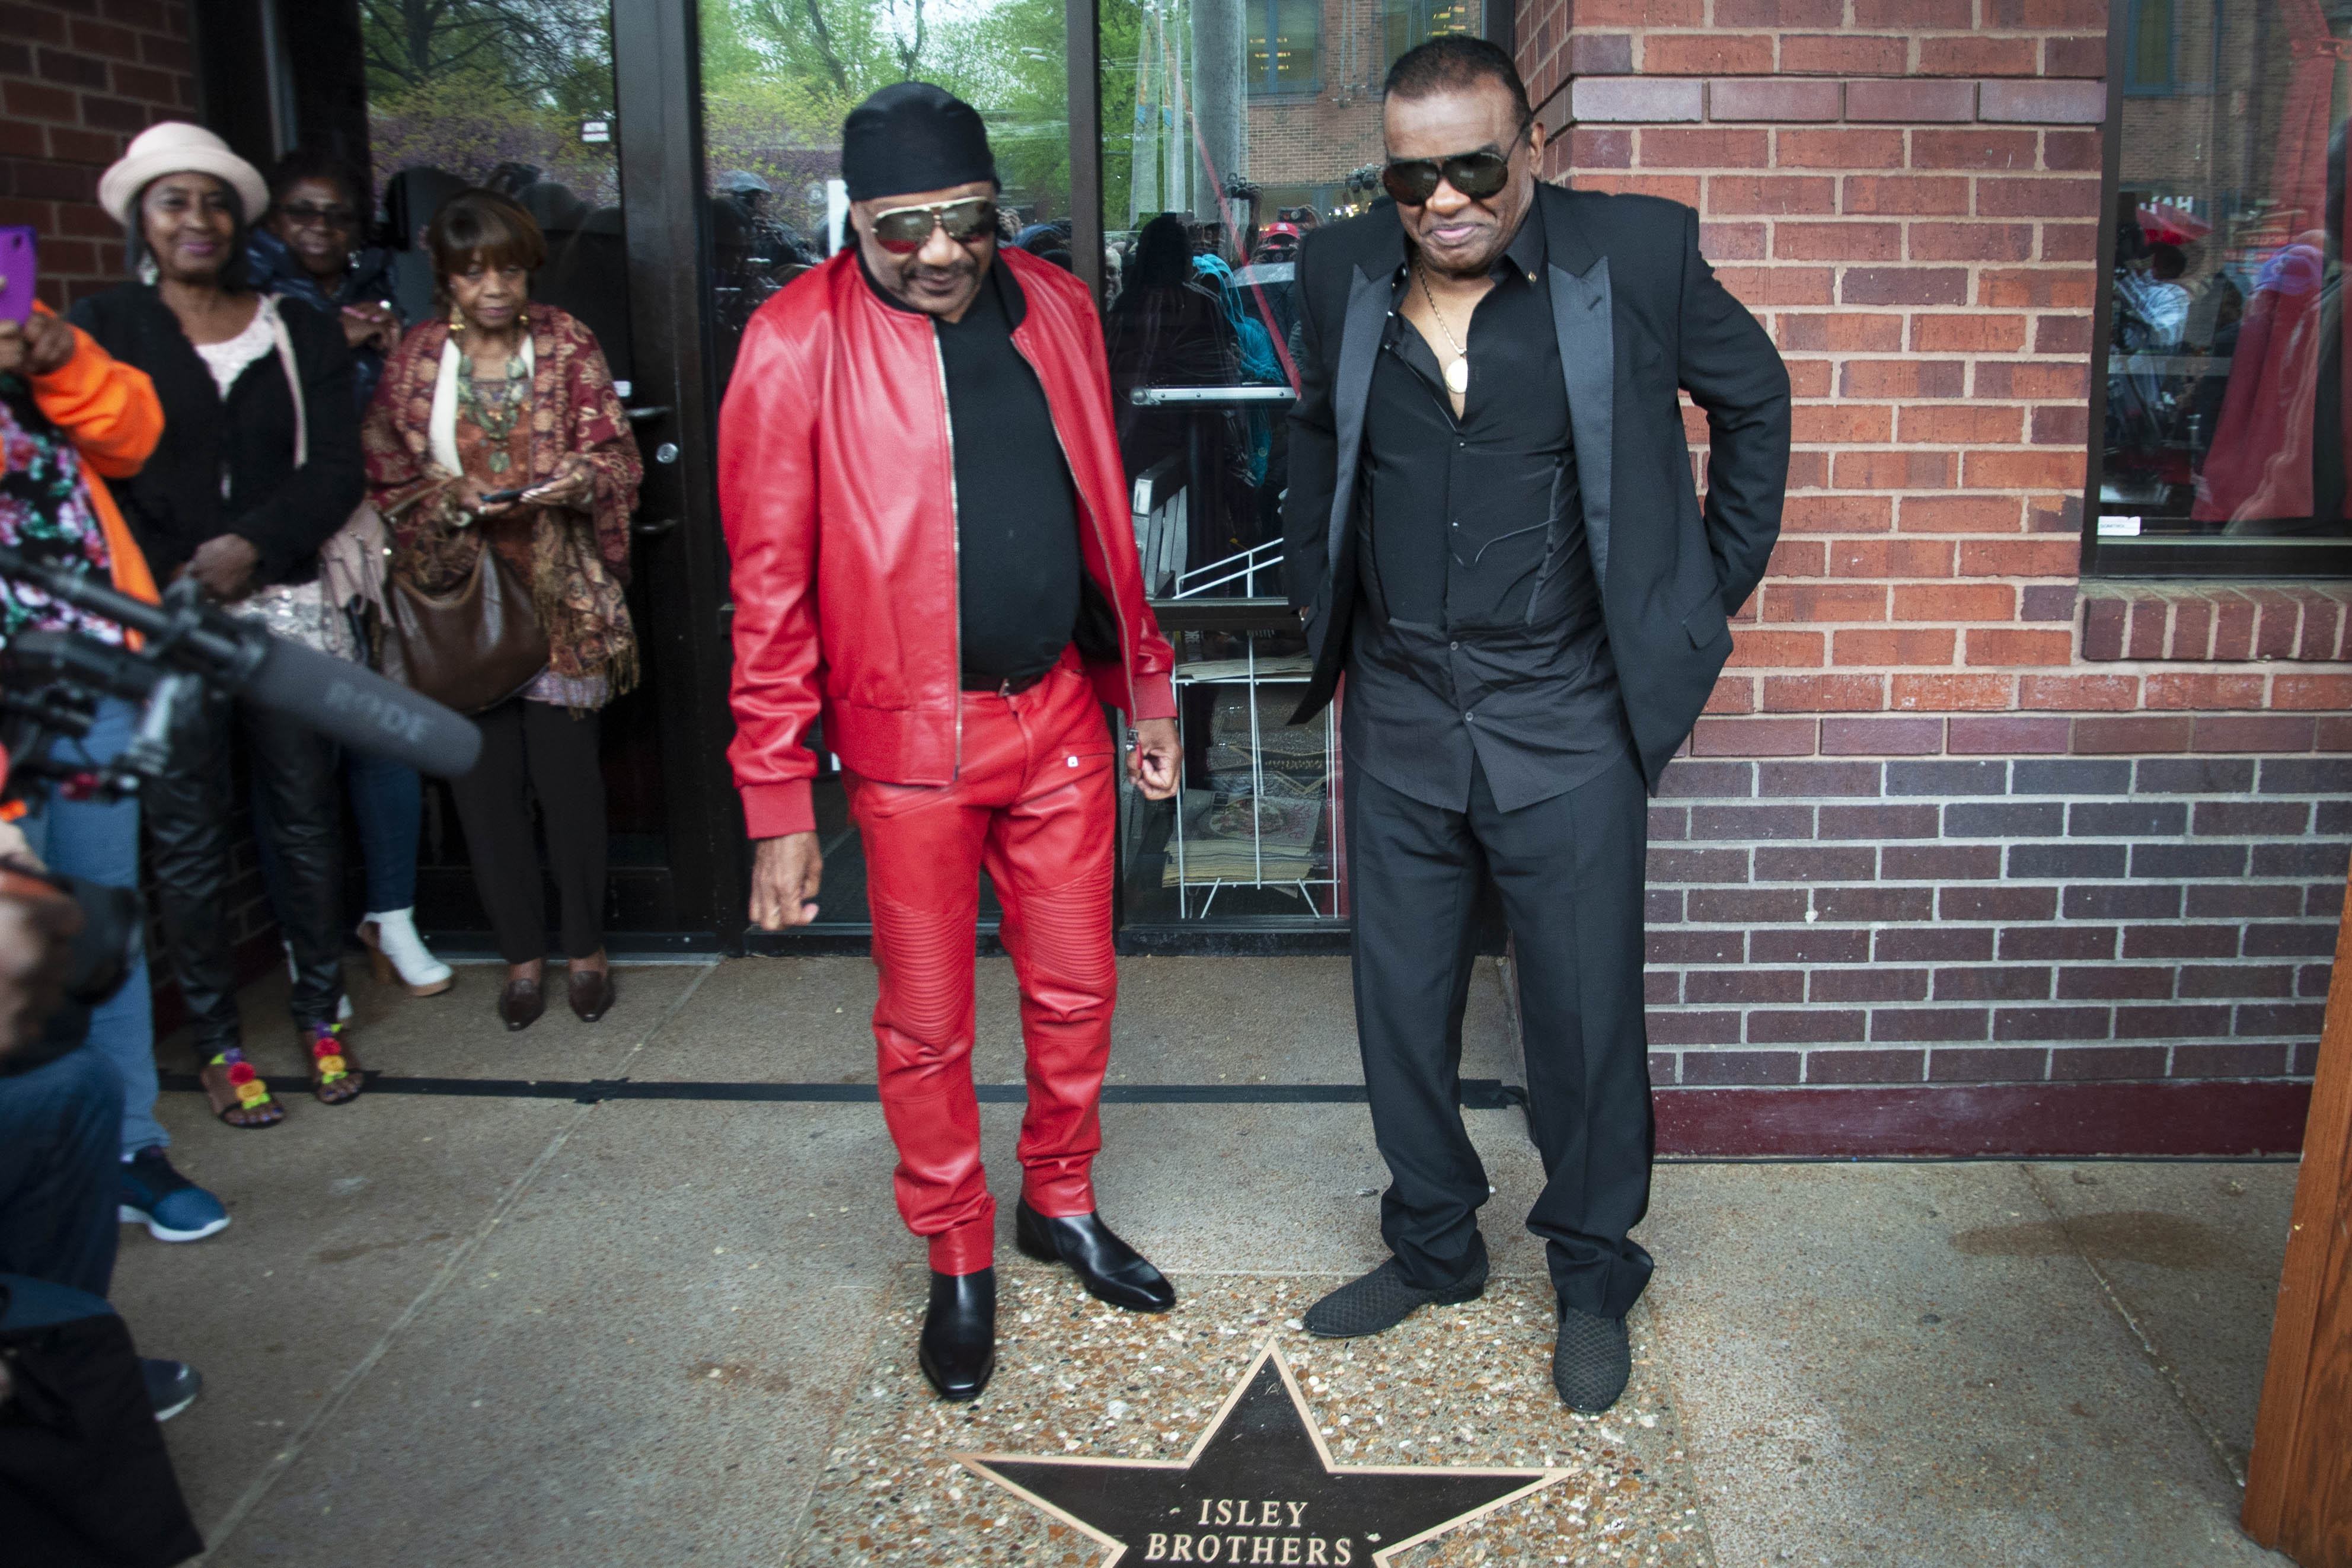 Isley Brothers Walk of Fame Star. Photo by KE Luther.